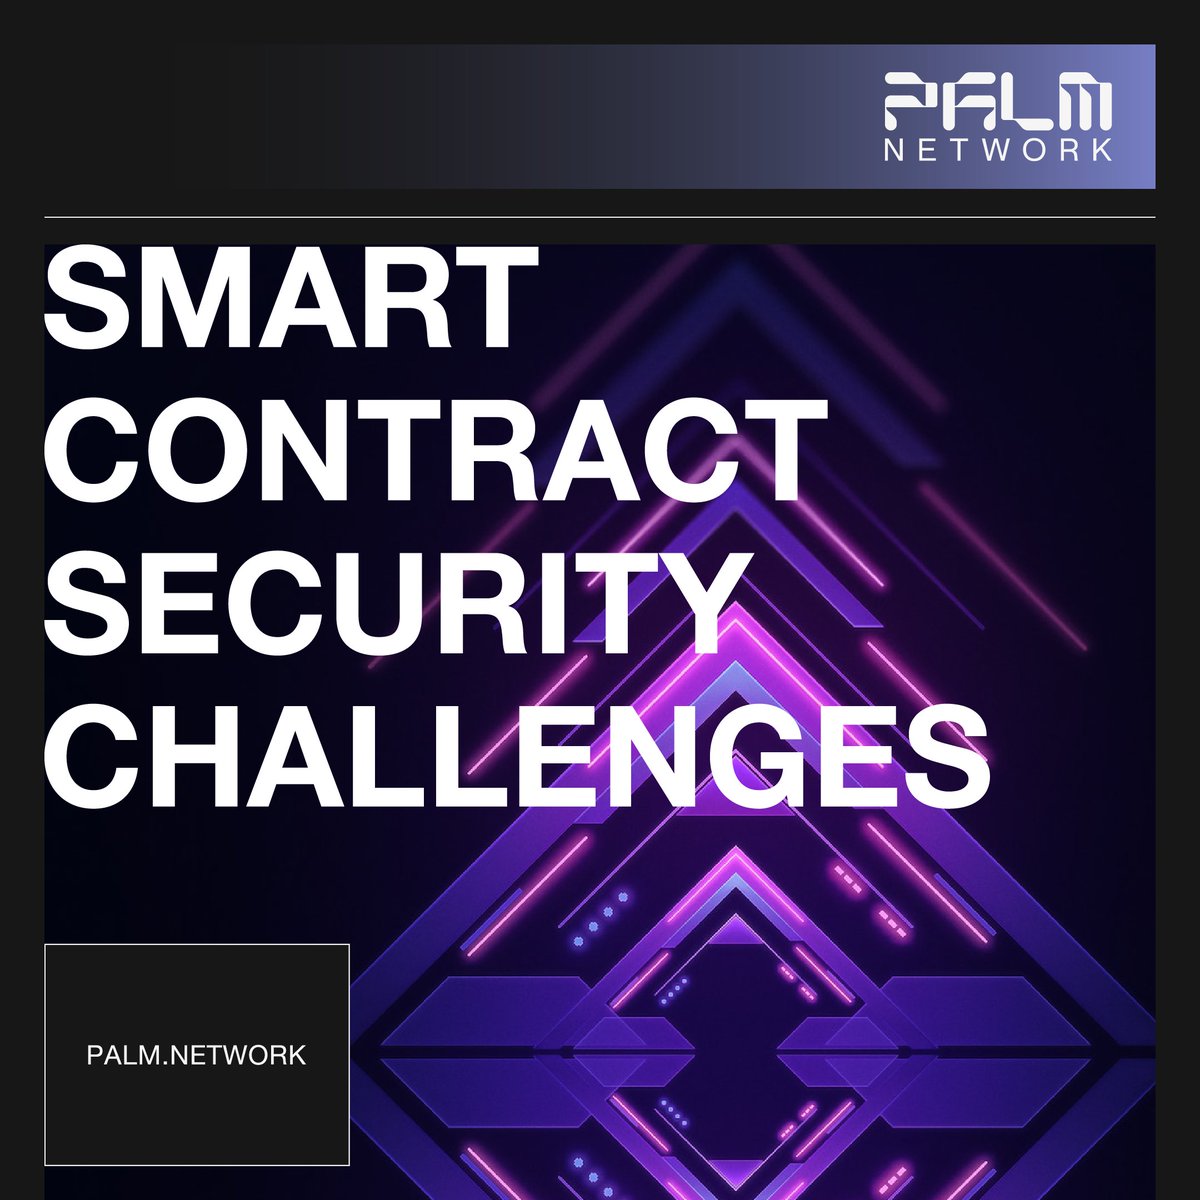 Smart contracts are powerful but come with their own set of security challenges🔐.. Auditing and formal verification play crucial roles in ensuring these contracts are bug-free and secure. #SmartContractSecurity #BlockchainCoding 🔗